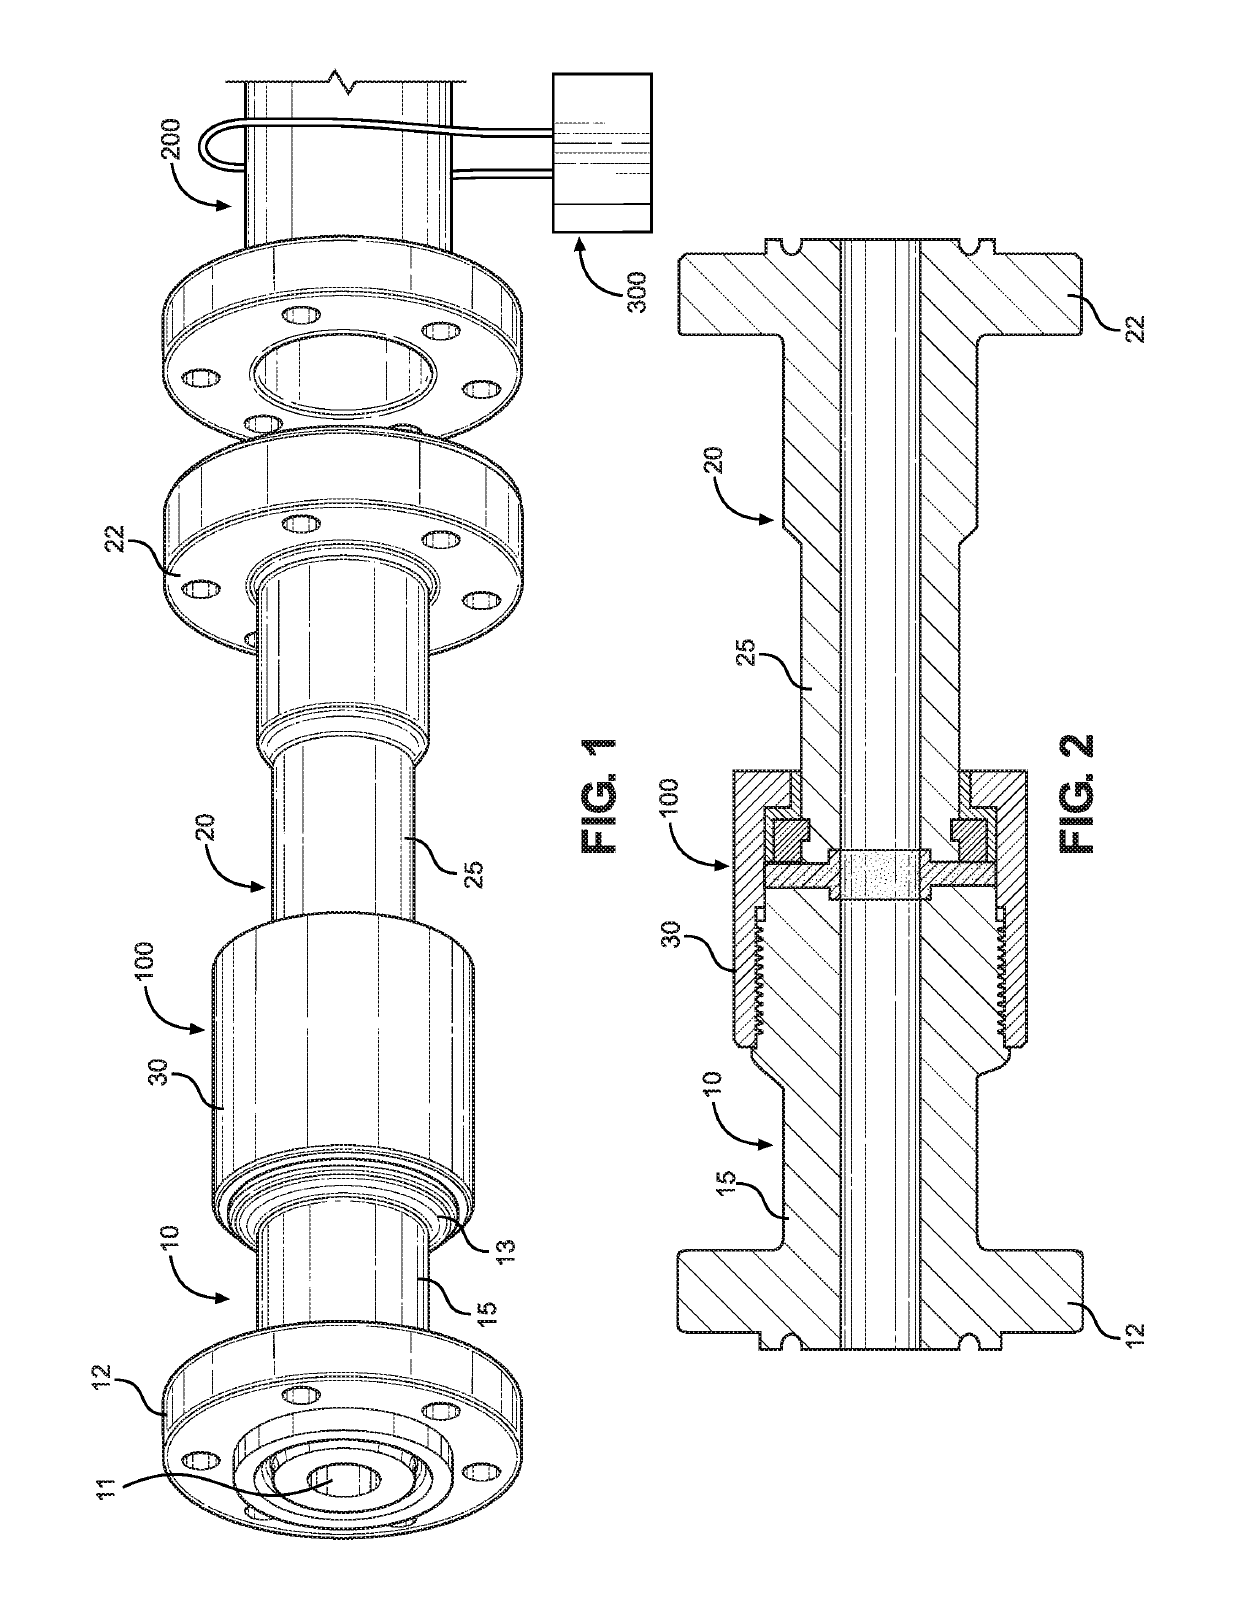 Method and apparatus for interrupting electrical conductivity through pipelines or other tubular goods